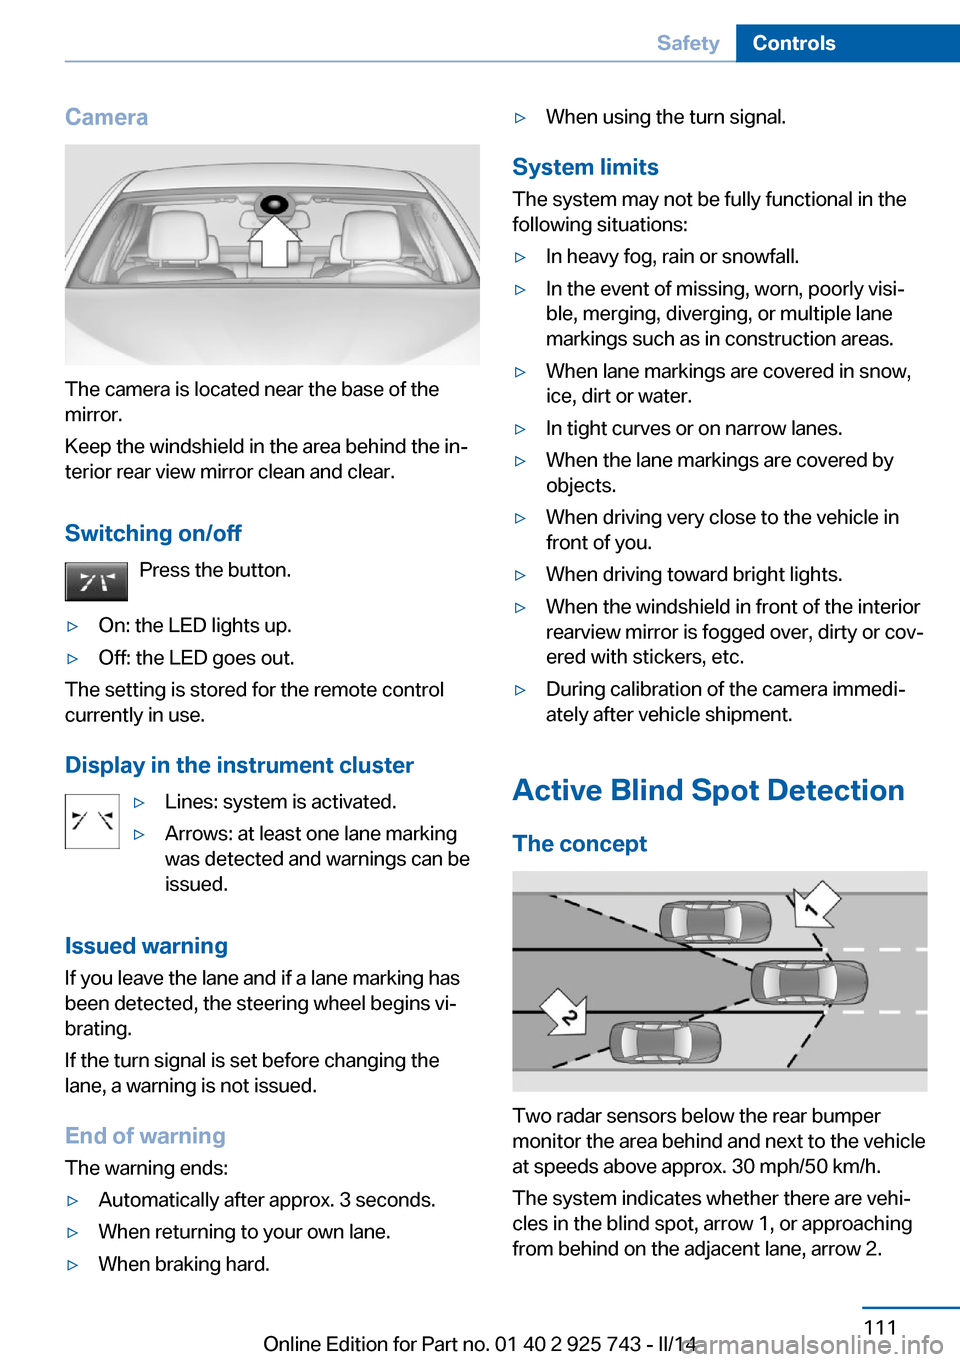 BMW 3 SERIES SEDAN 2014 F30 Owners Manual Camera
The camera is located near the base of the
mirror.
Keep the windshield in the area behind the in‐
terior rear view mirror clean and clear.
Switching on/off Press the button.
▷On: the LED li